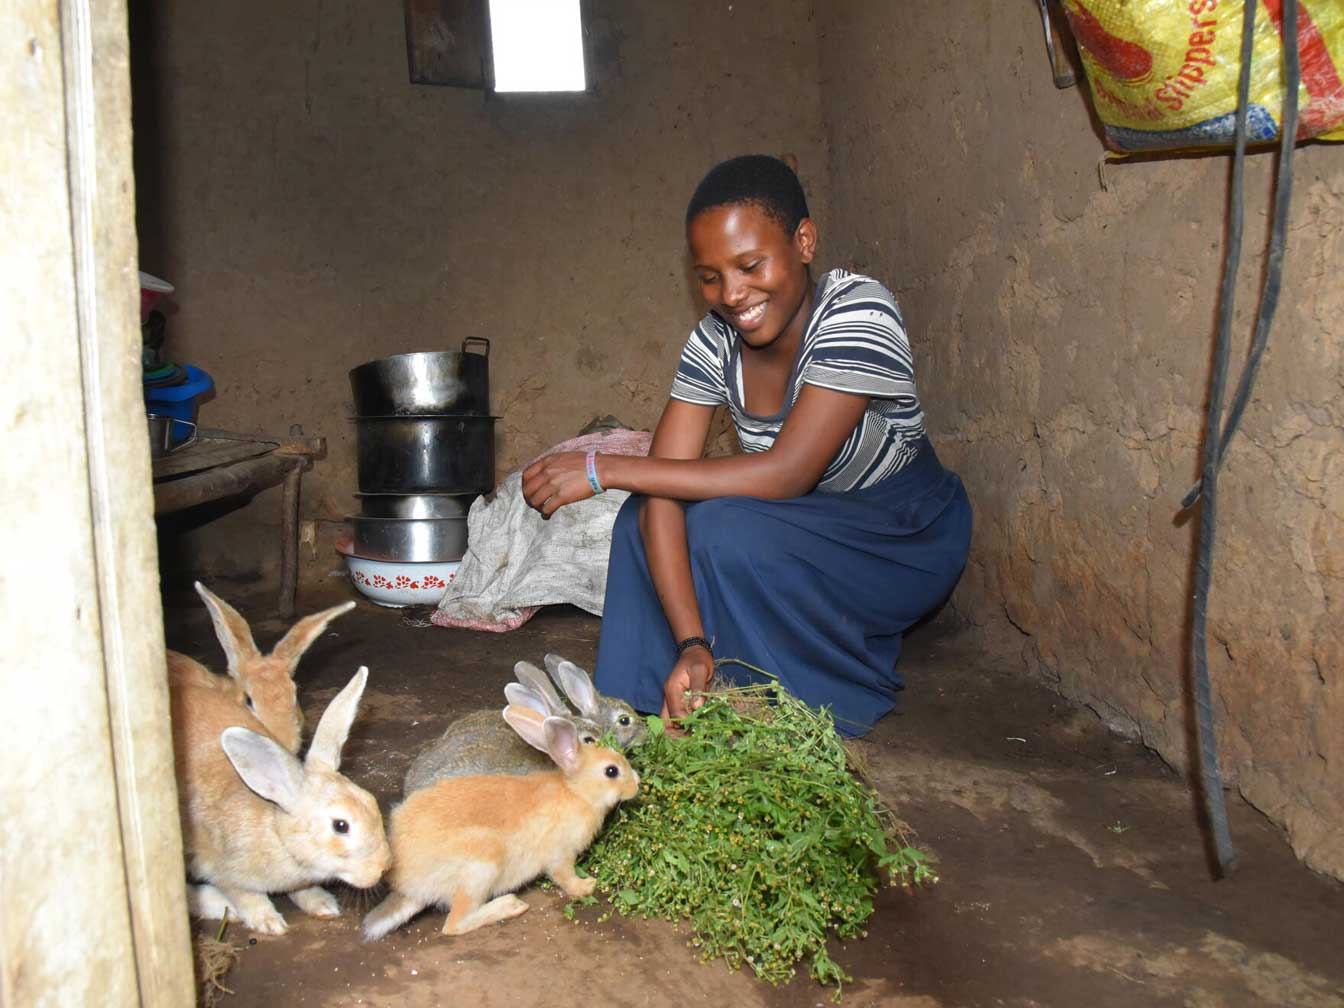 A woman feeding vegetables to a group of rabbits, inside a home.